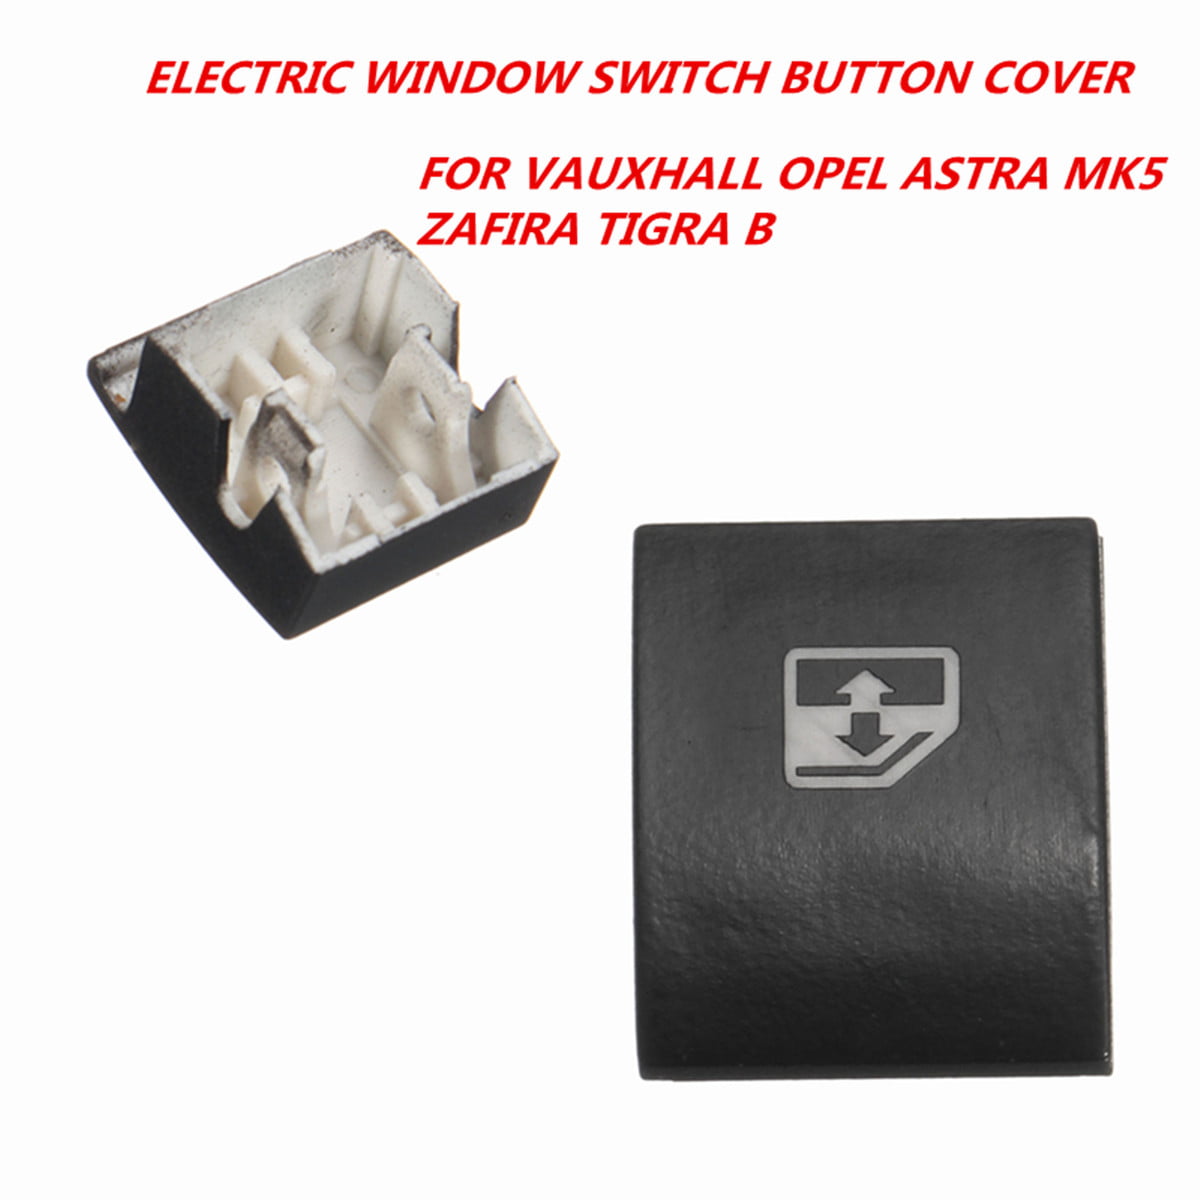 1x For Vauxhall Astra Zafira Tigra Window Control Panel Button Switch Cover